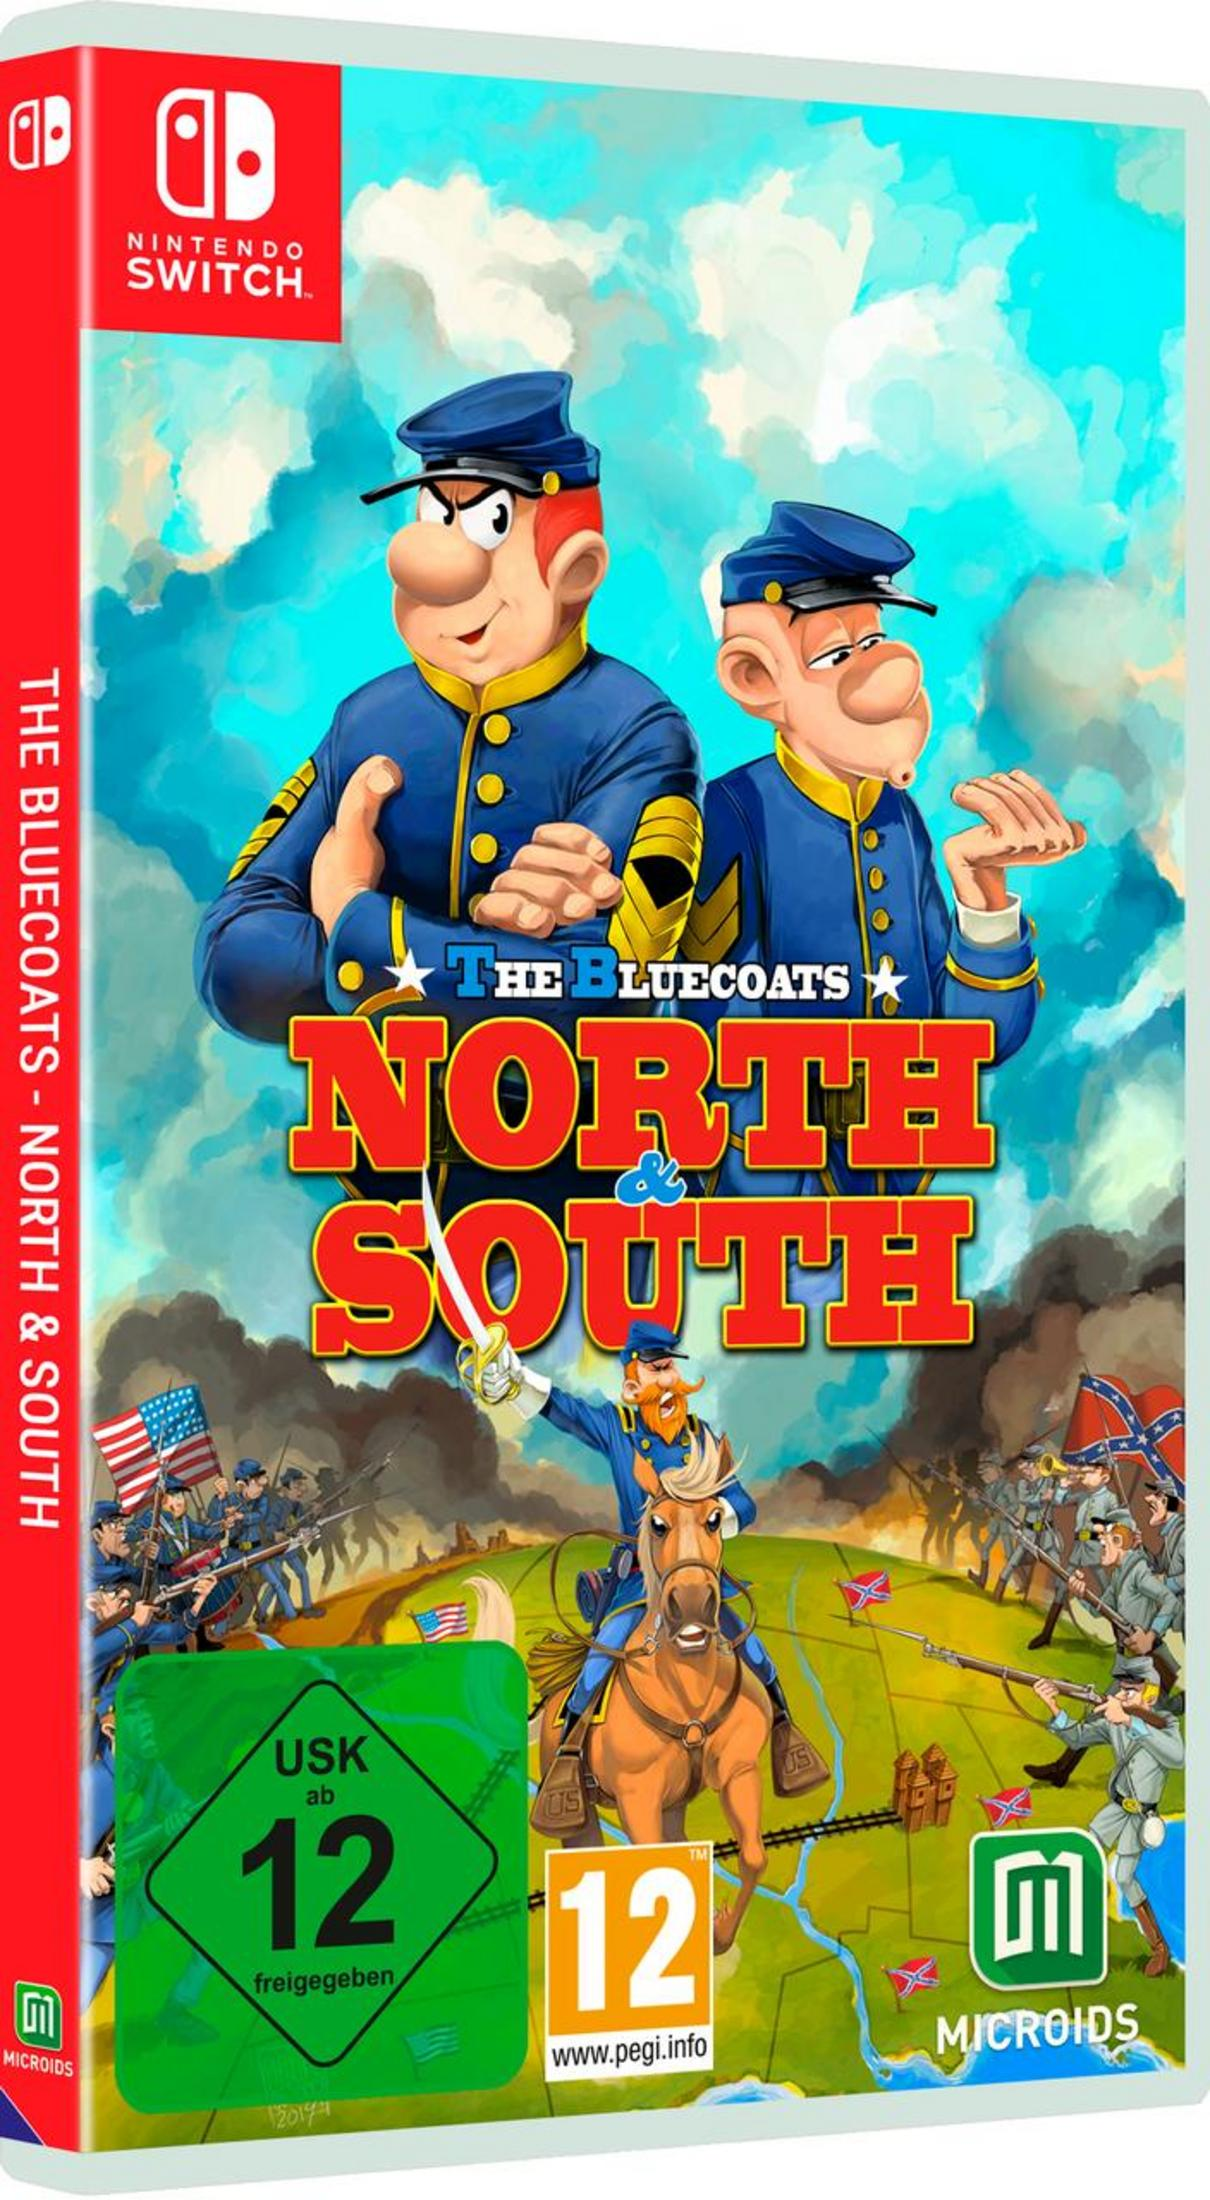 The Bluecoats: - Switch] and North [Nintendo South